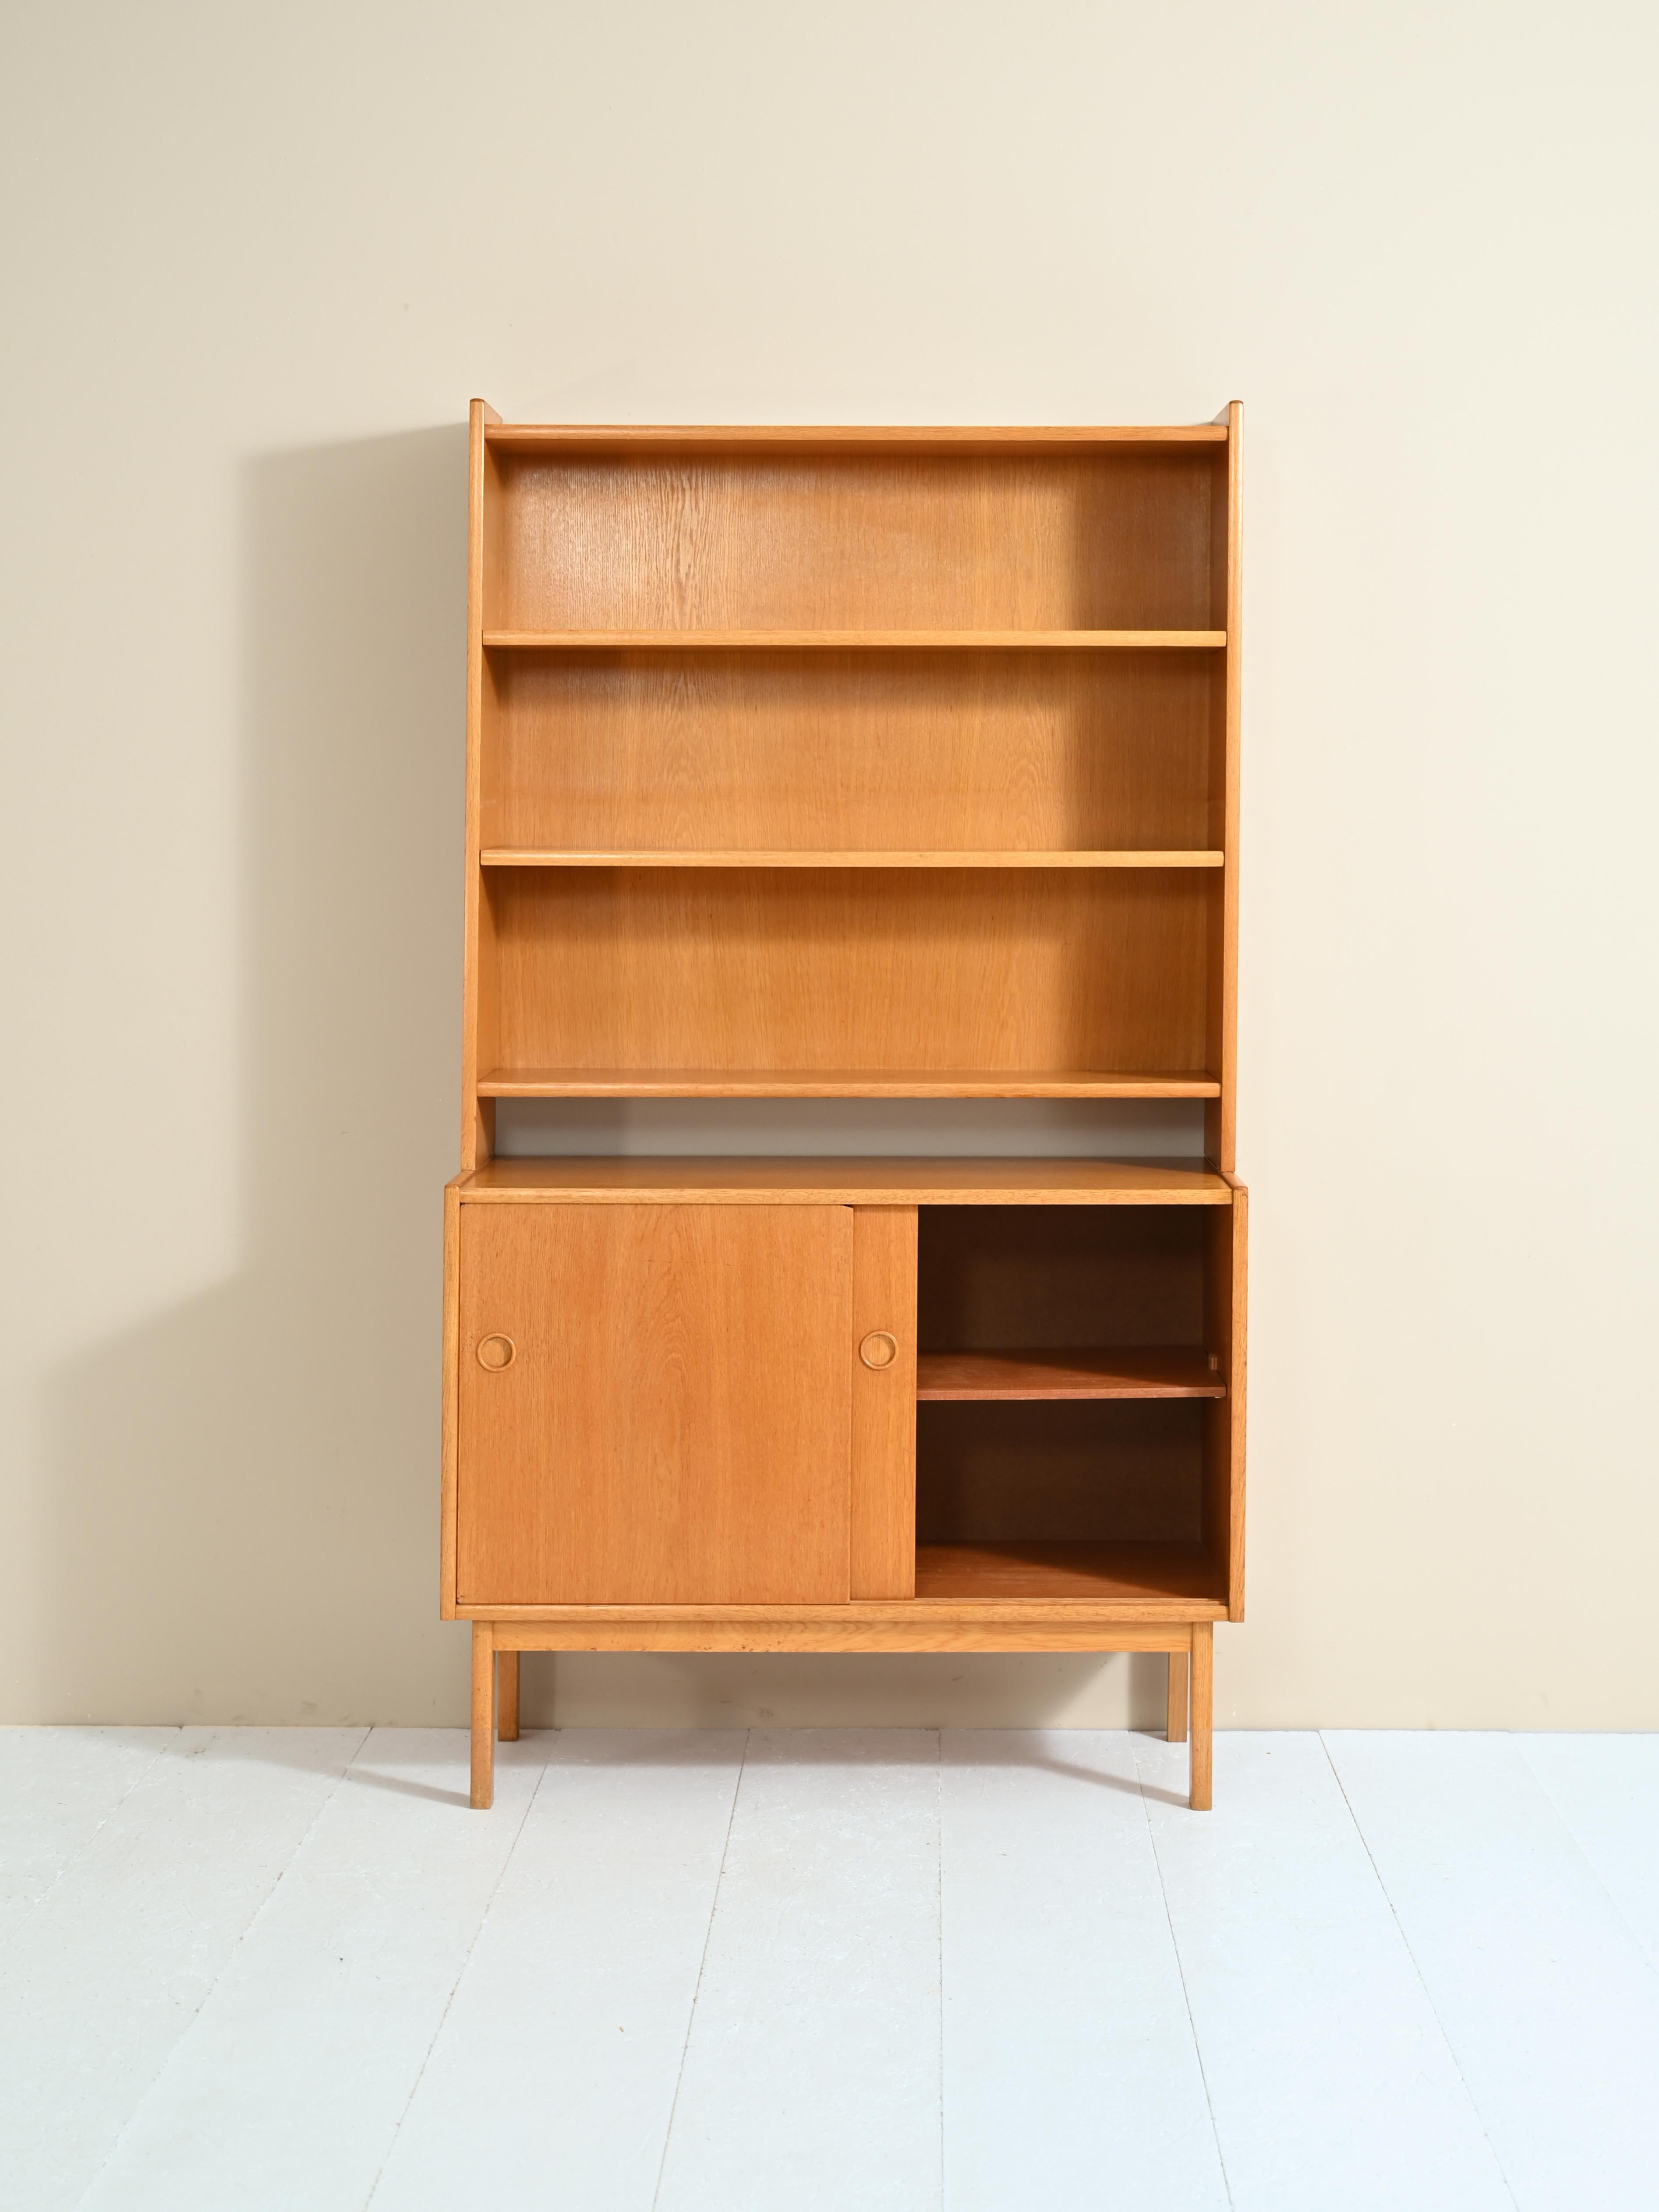 Bookcase with shelving and cabinet, 1950s/60s.
Original vintage cabinet from Scandinavia consisting of two parts. The upper part is a bookcase equipped with adjustable height shelving, the lower part is a cabinet equipped with two sliding